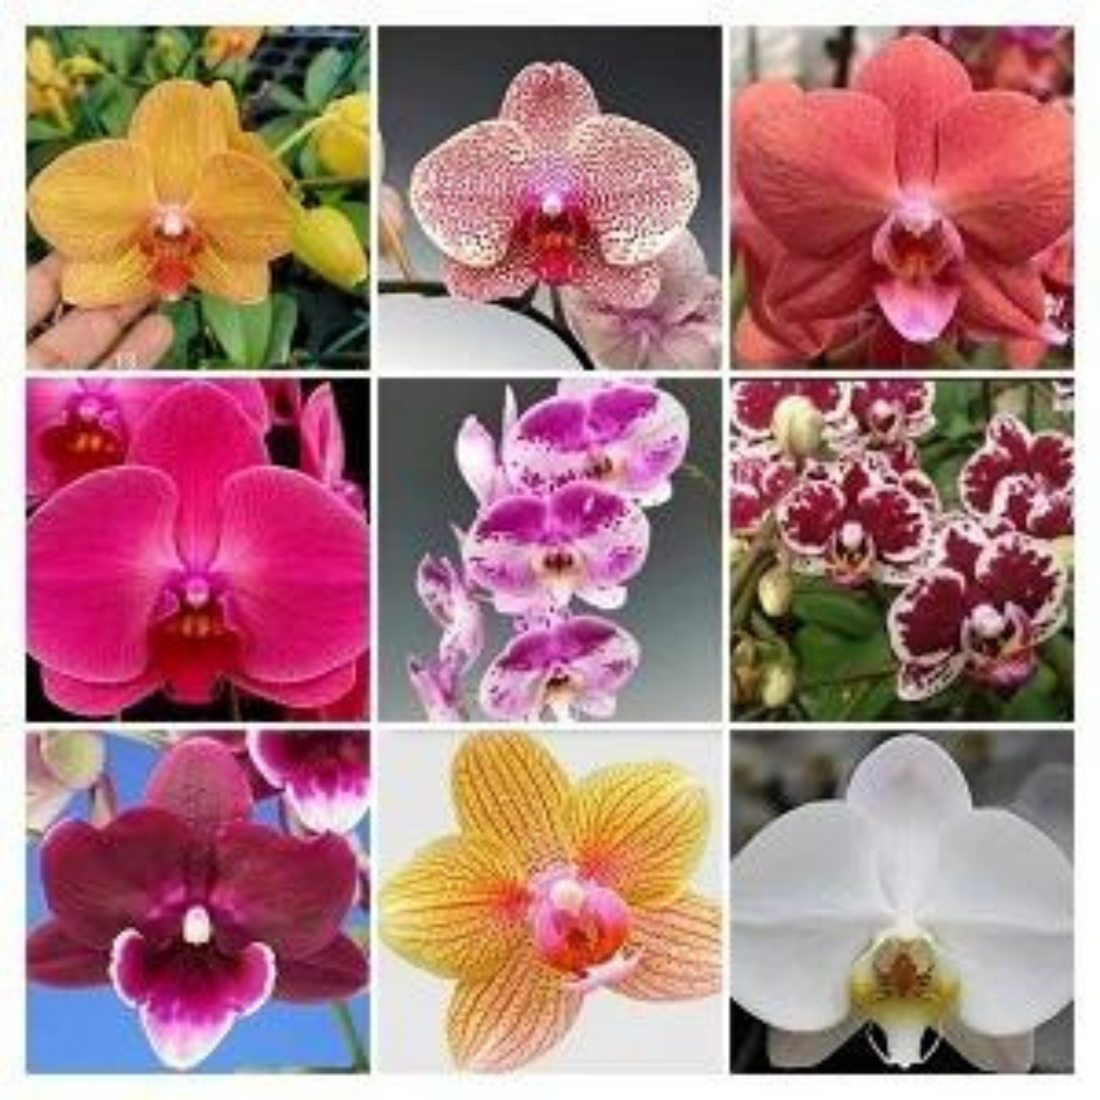 Phalaenopsis 10 Plants With Or Without Bud Combo - Blooming Size